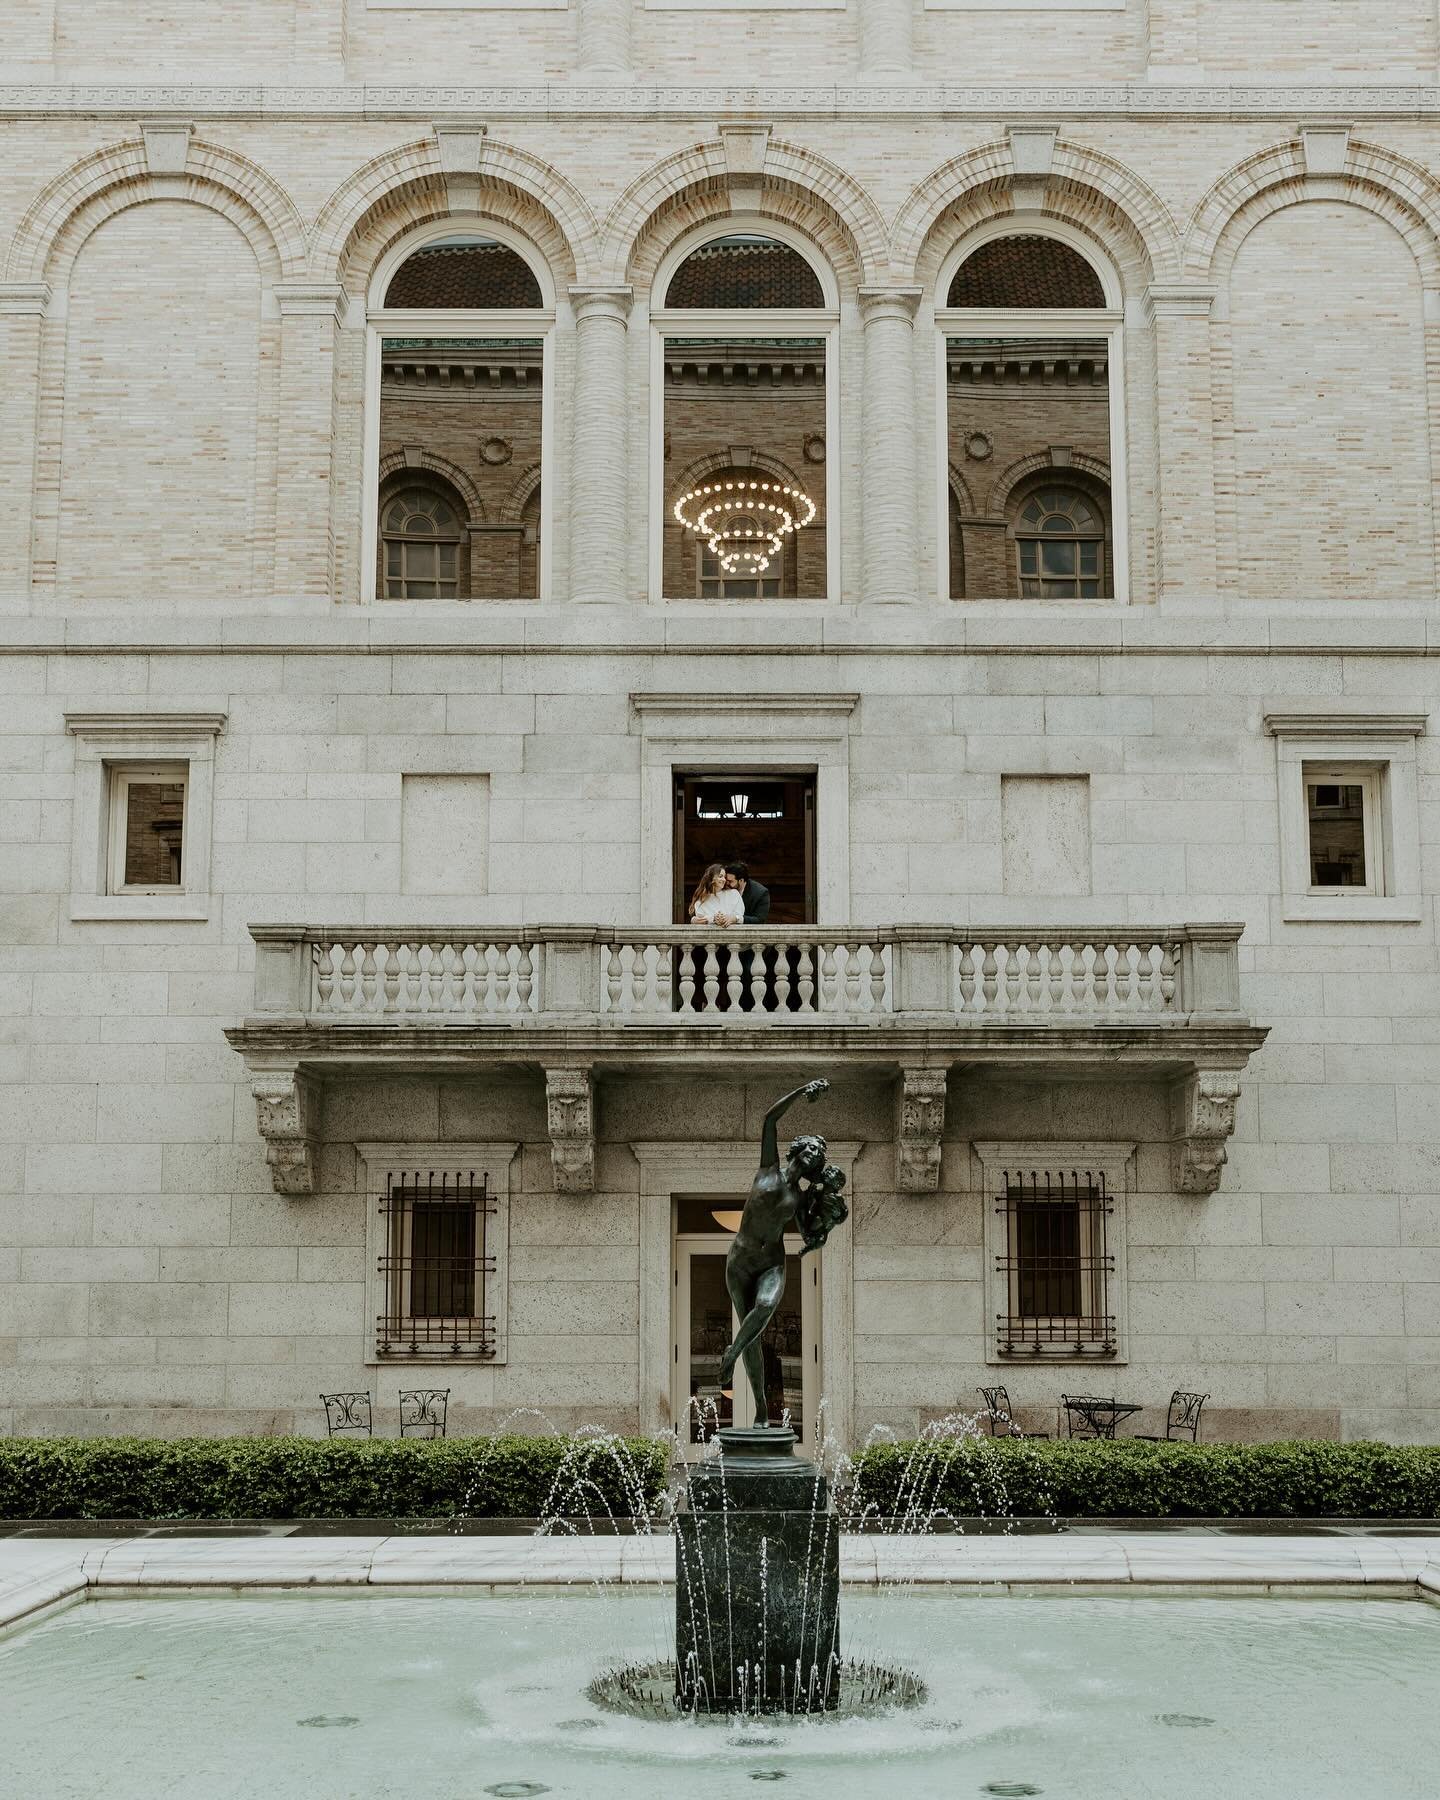 SHE&rsquo;S BACK! The absolute best morning capturing Natalie &amp; Adam at the iconic @bplboston &mdash; cannot imagine a better first shoot to welcome me back than hanging out with these two 🤍 Obsessed with these lovebirds and can&rsquo;t wait to 